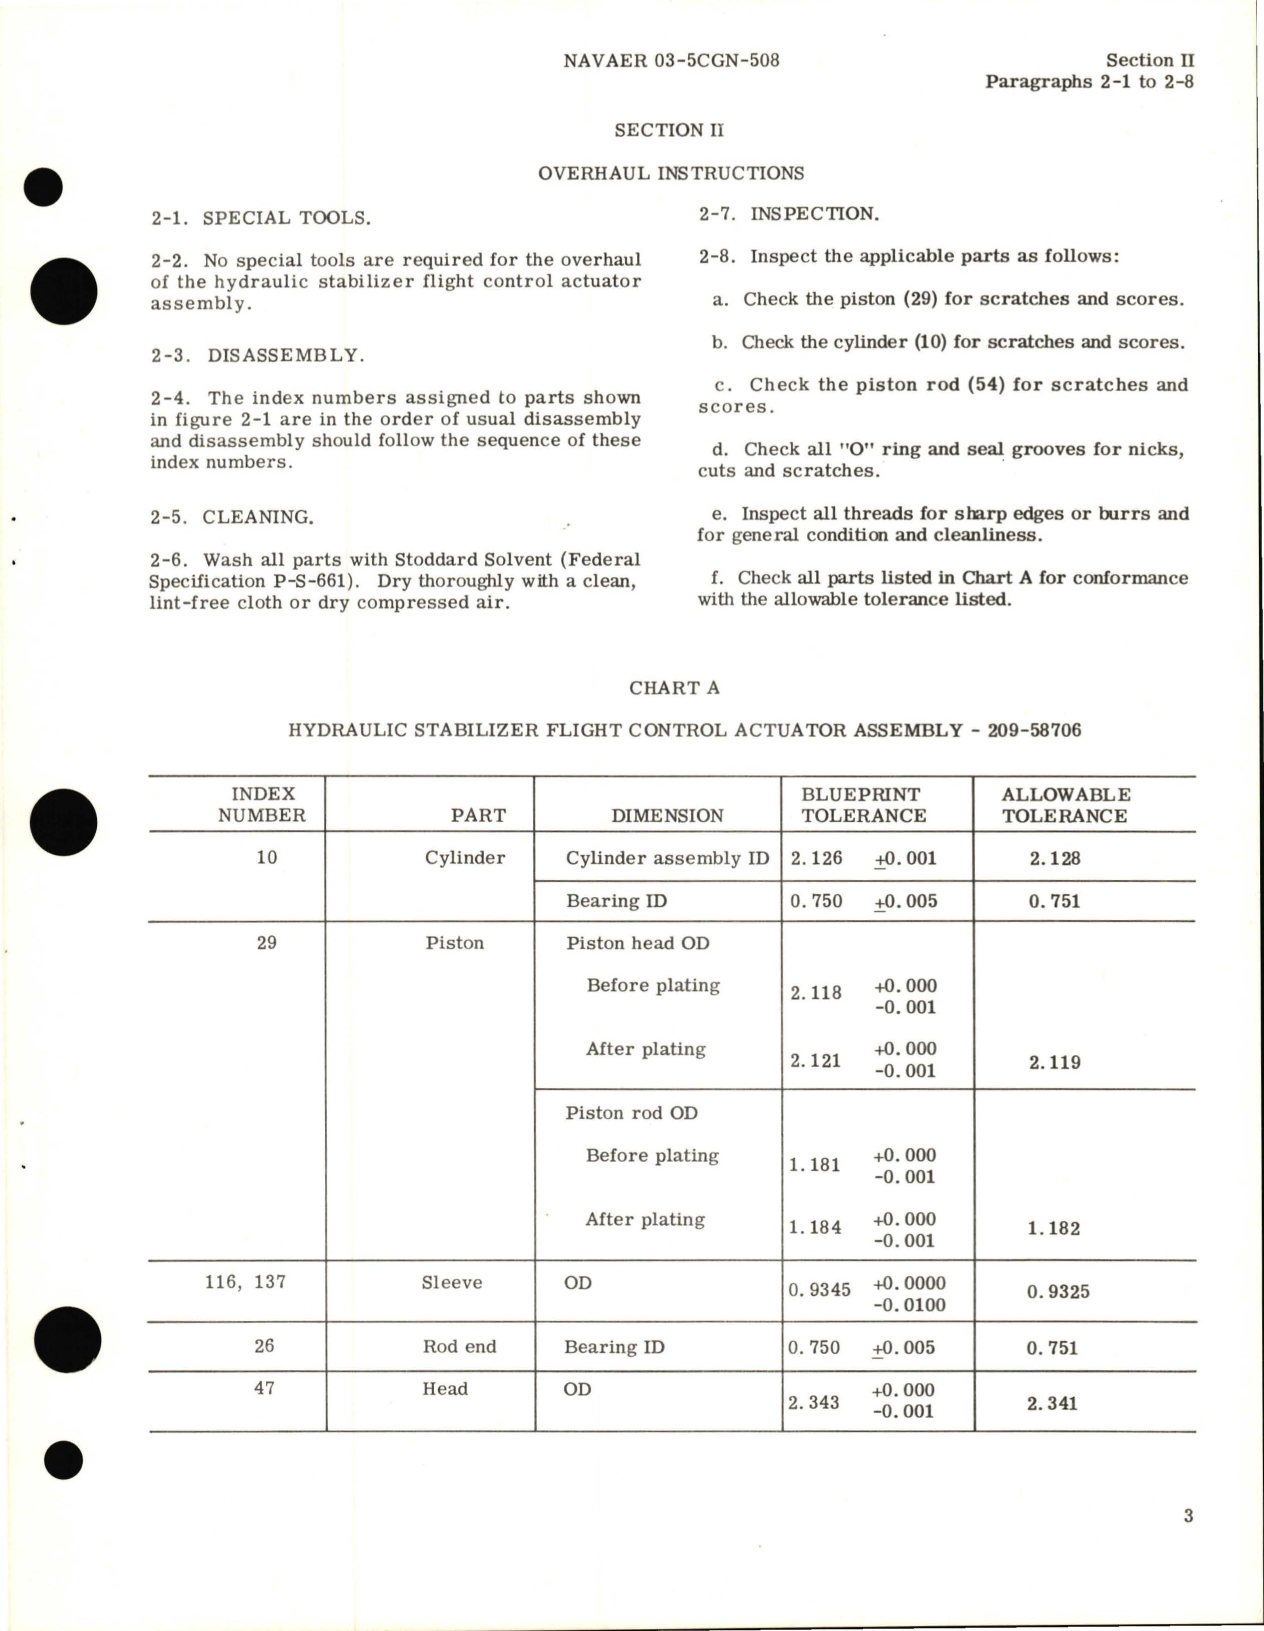 Sample page 5 from AirCorps Library document: Overhaul Instructions for Hydraulic Stabilizer Flight Control Actuator Assembly - Part 209-58706